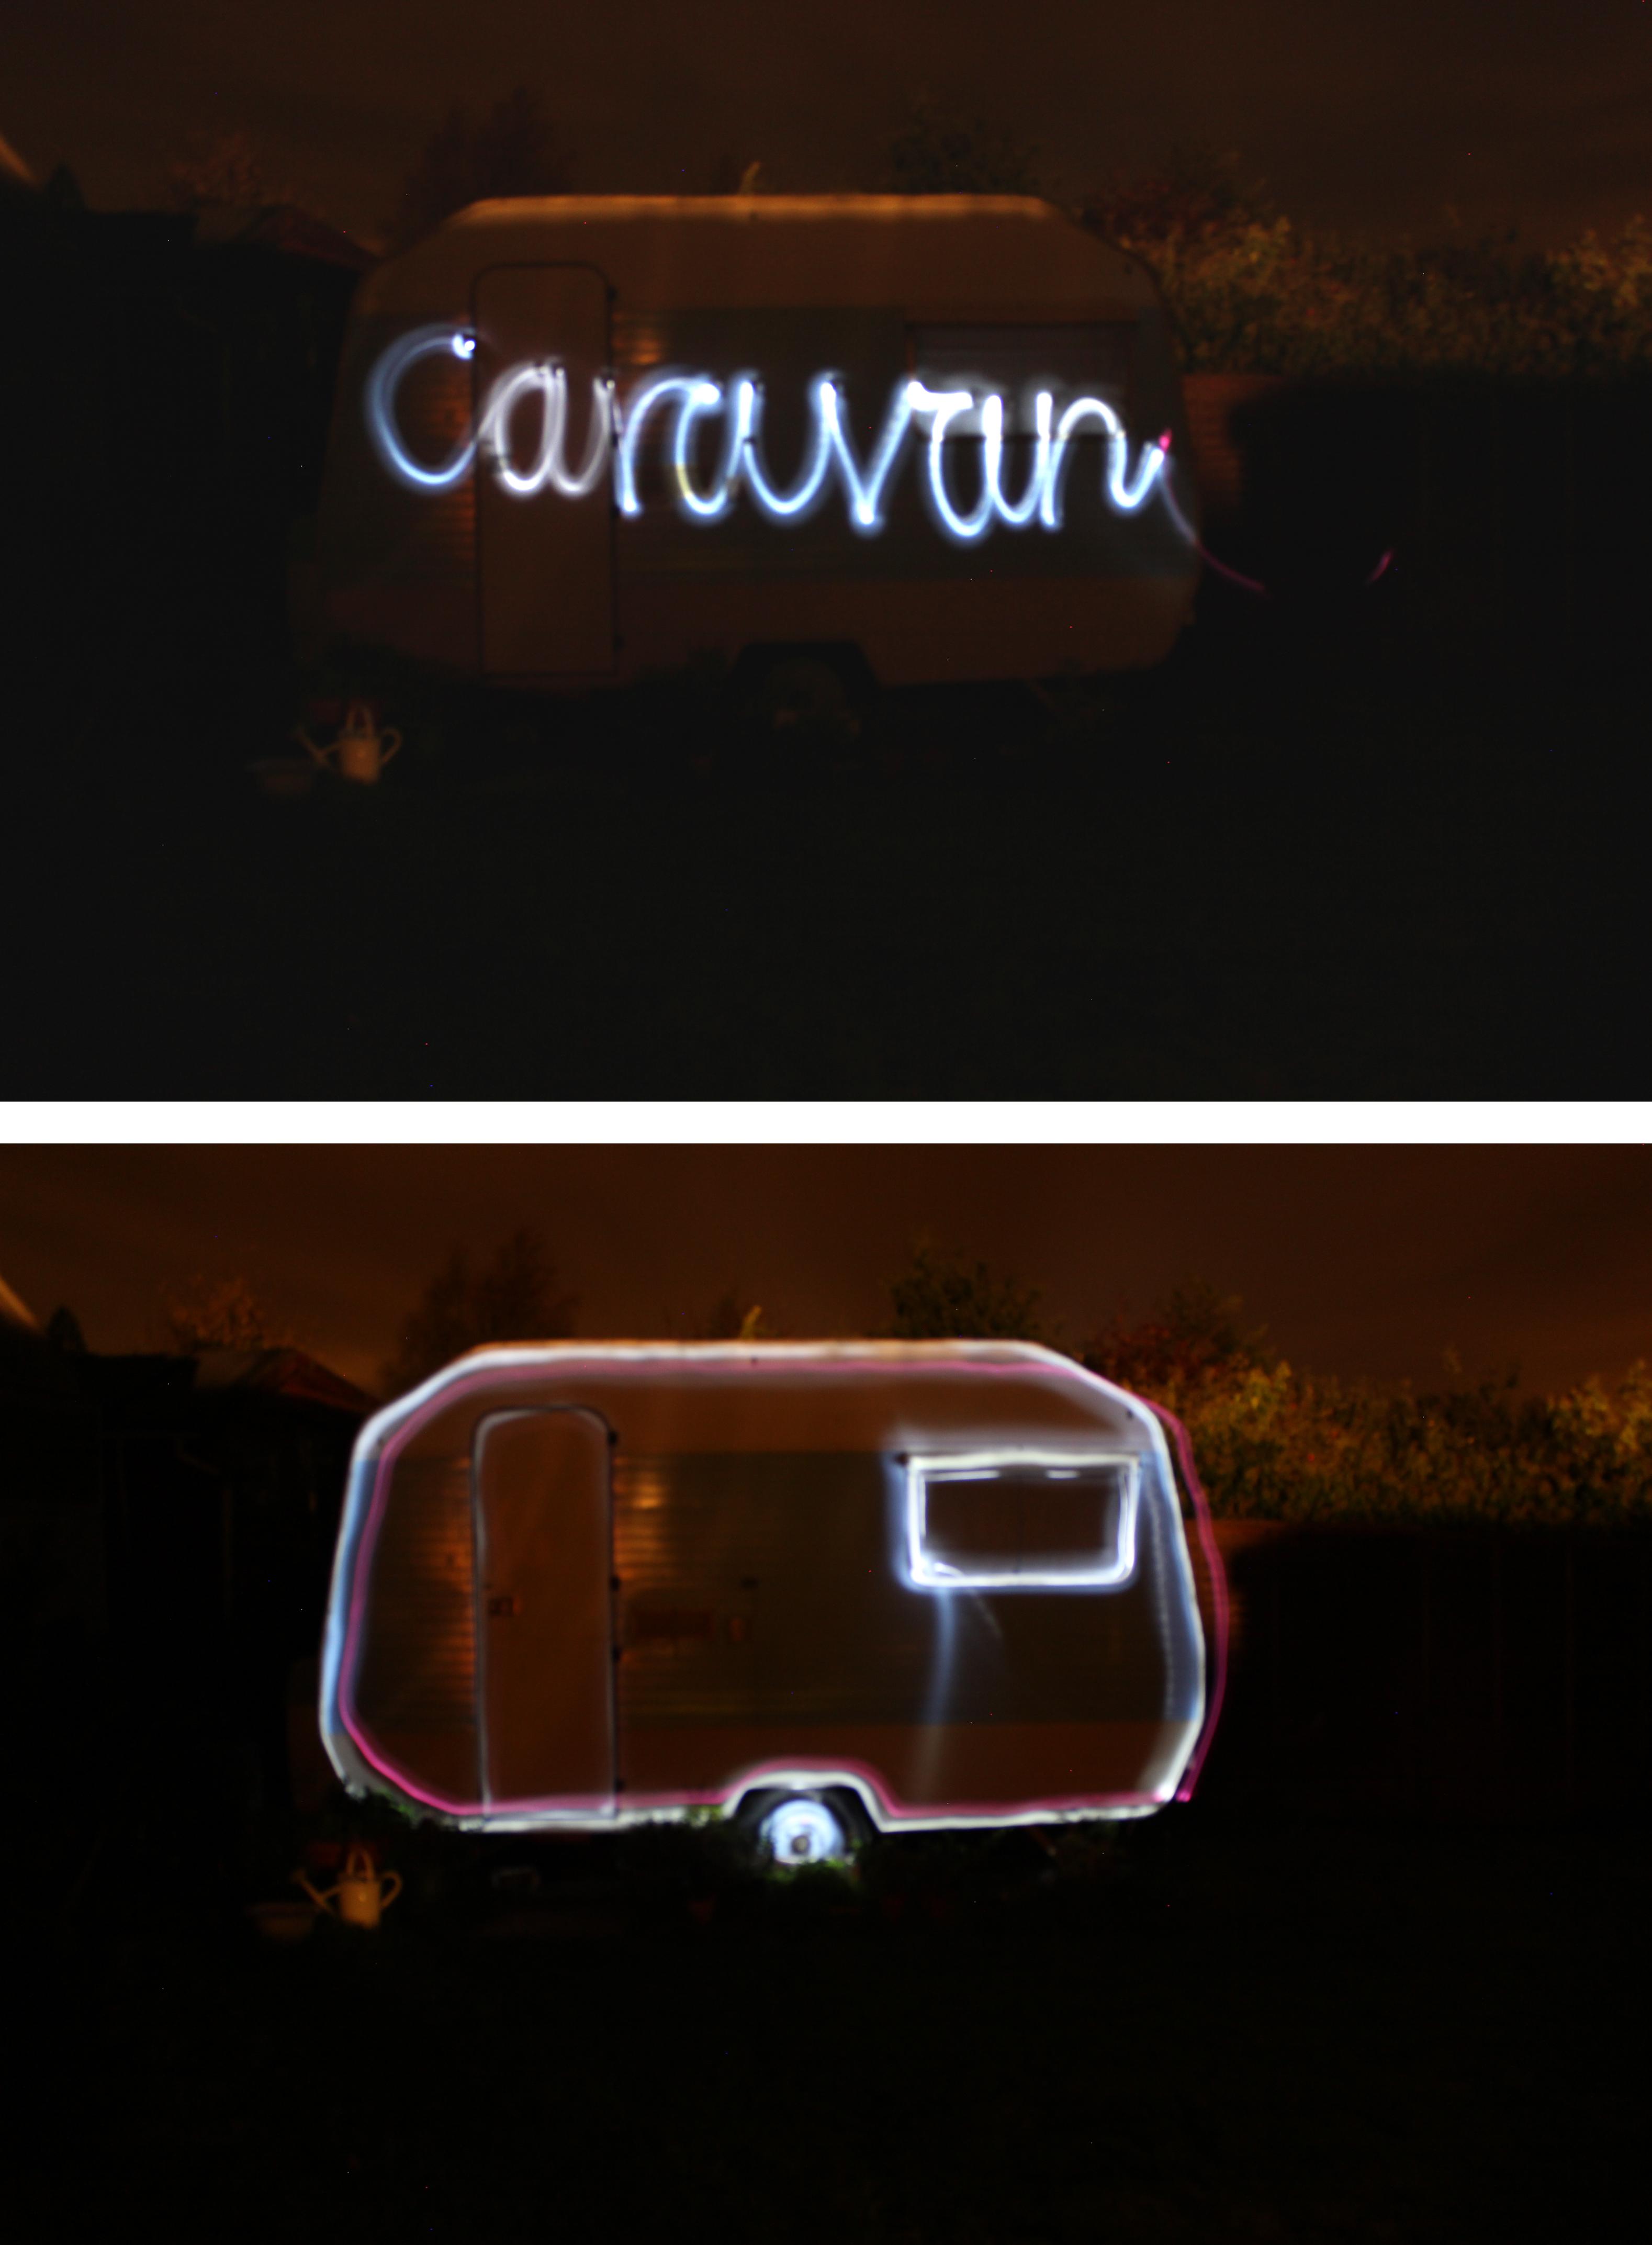 cassiefairy blog outline of caravan using torch light and slow shutter speed photography